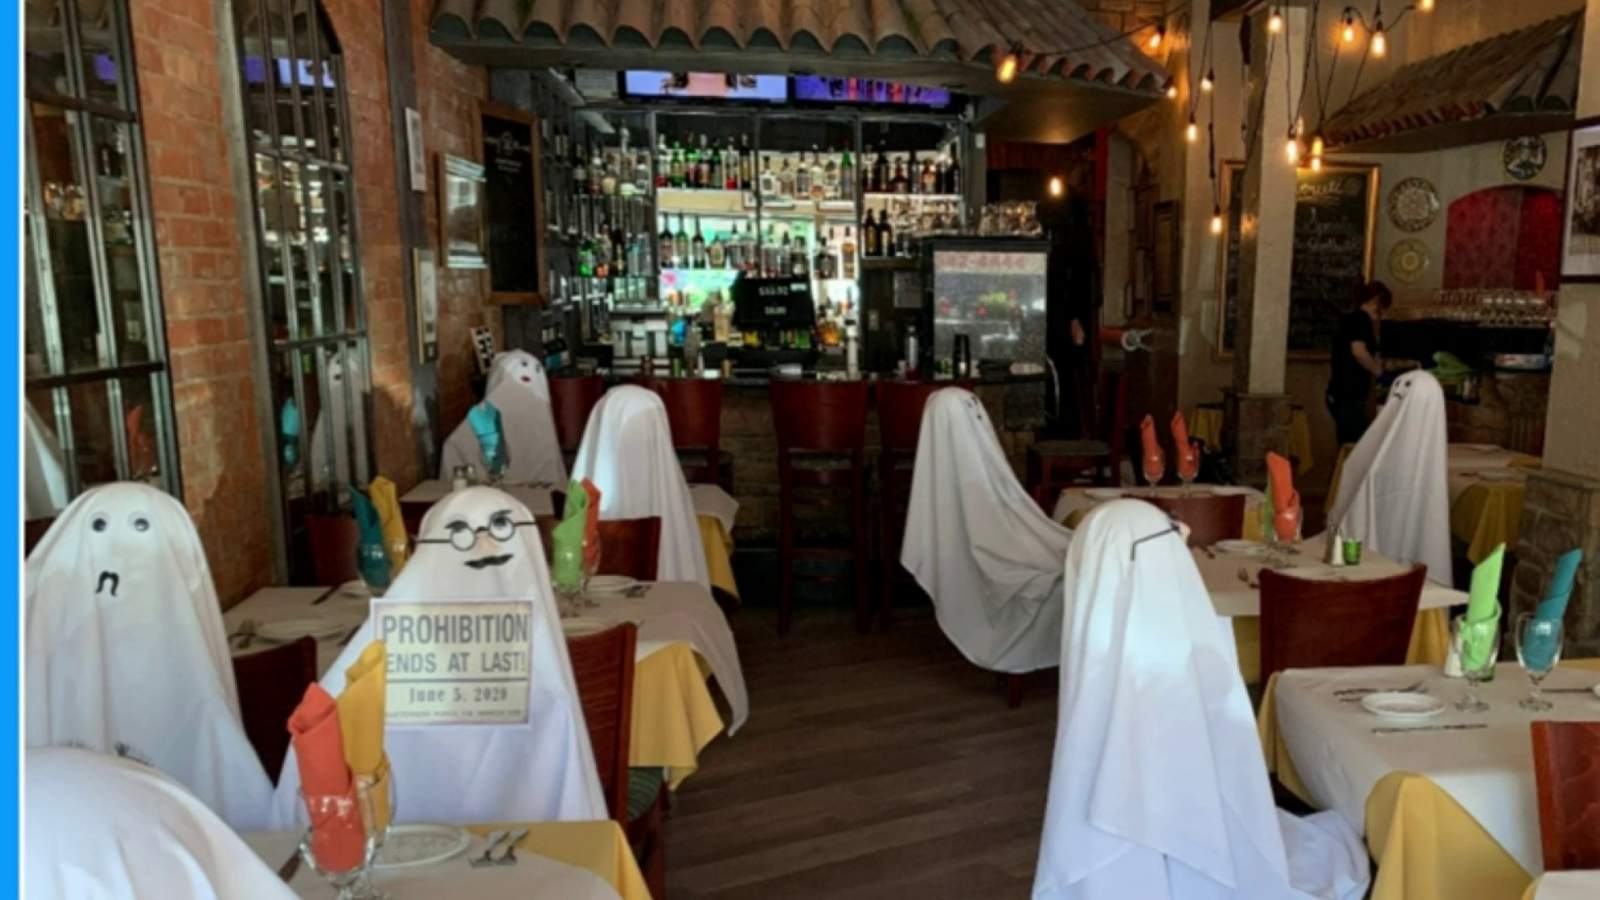 Dine with ghosts at this Royal Oak restaurant